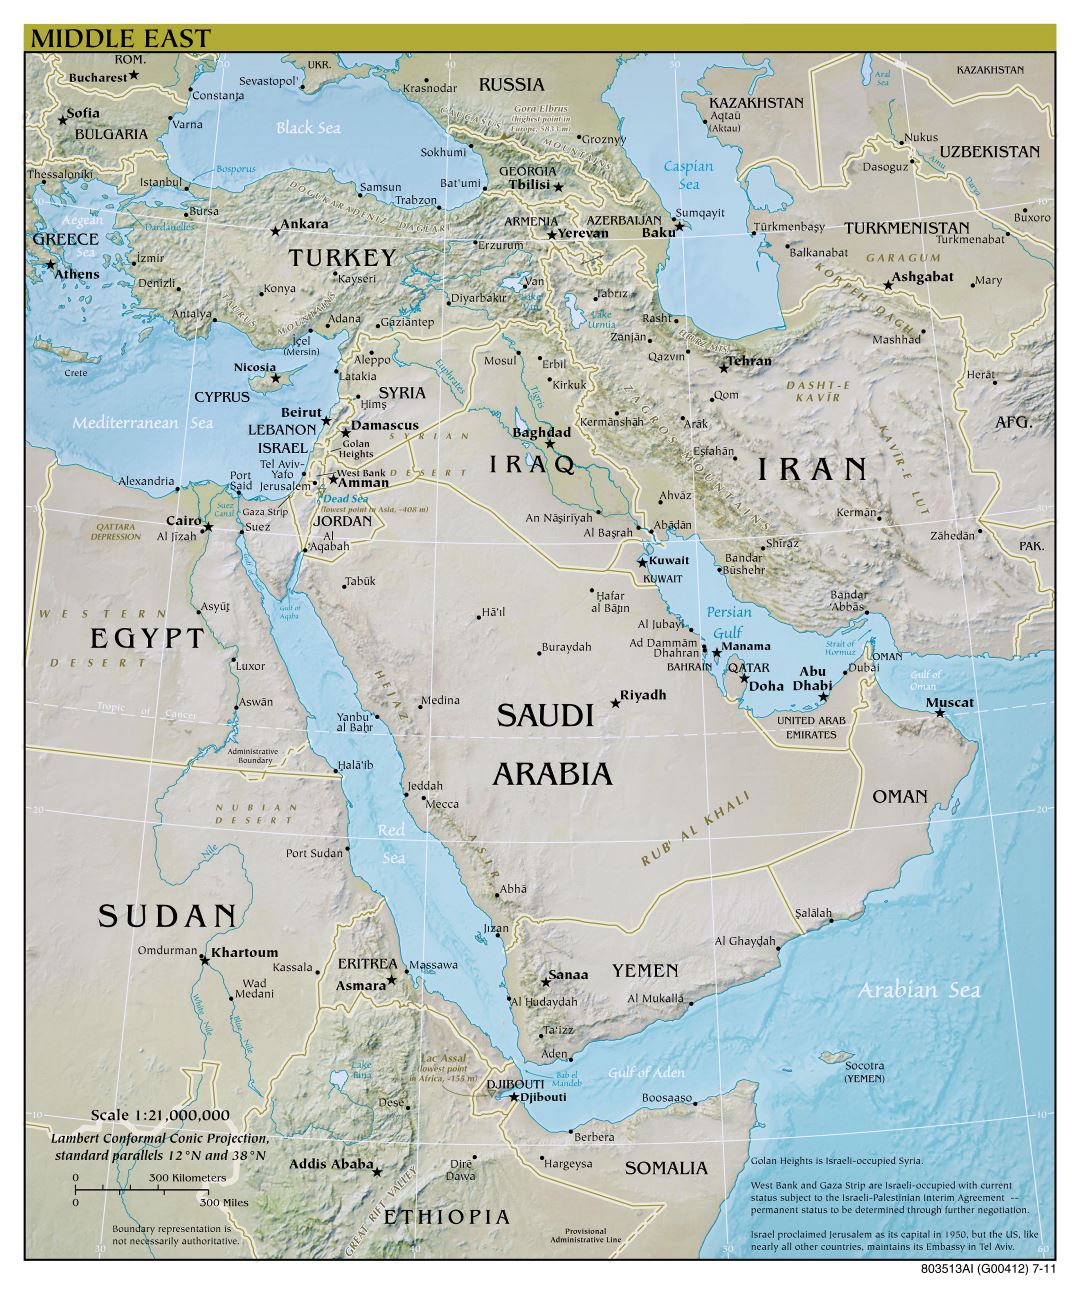 Large scale detailed political map of the Middle East with relief, major cities and capitals - 2011